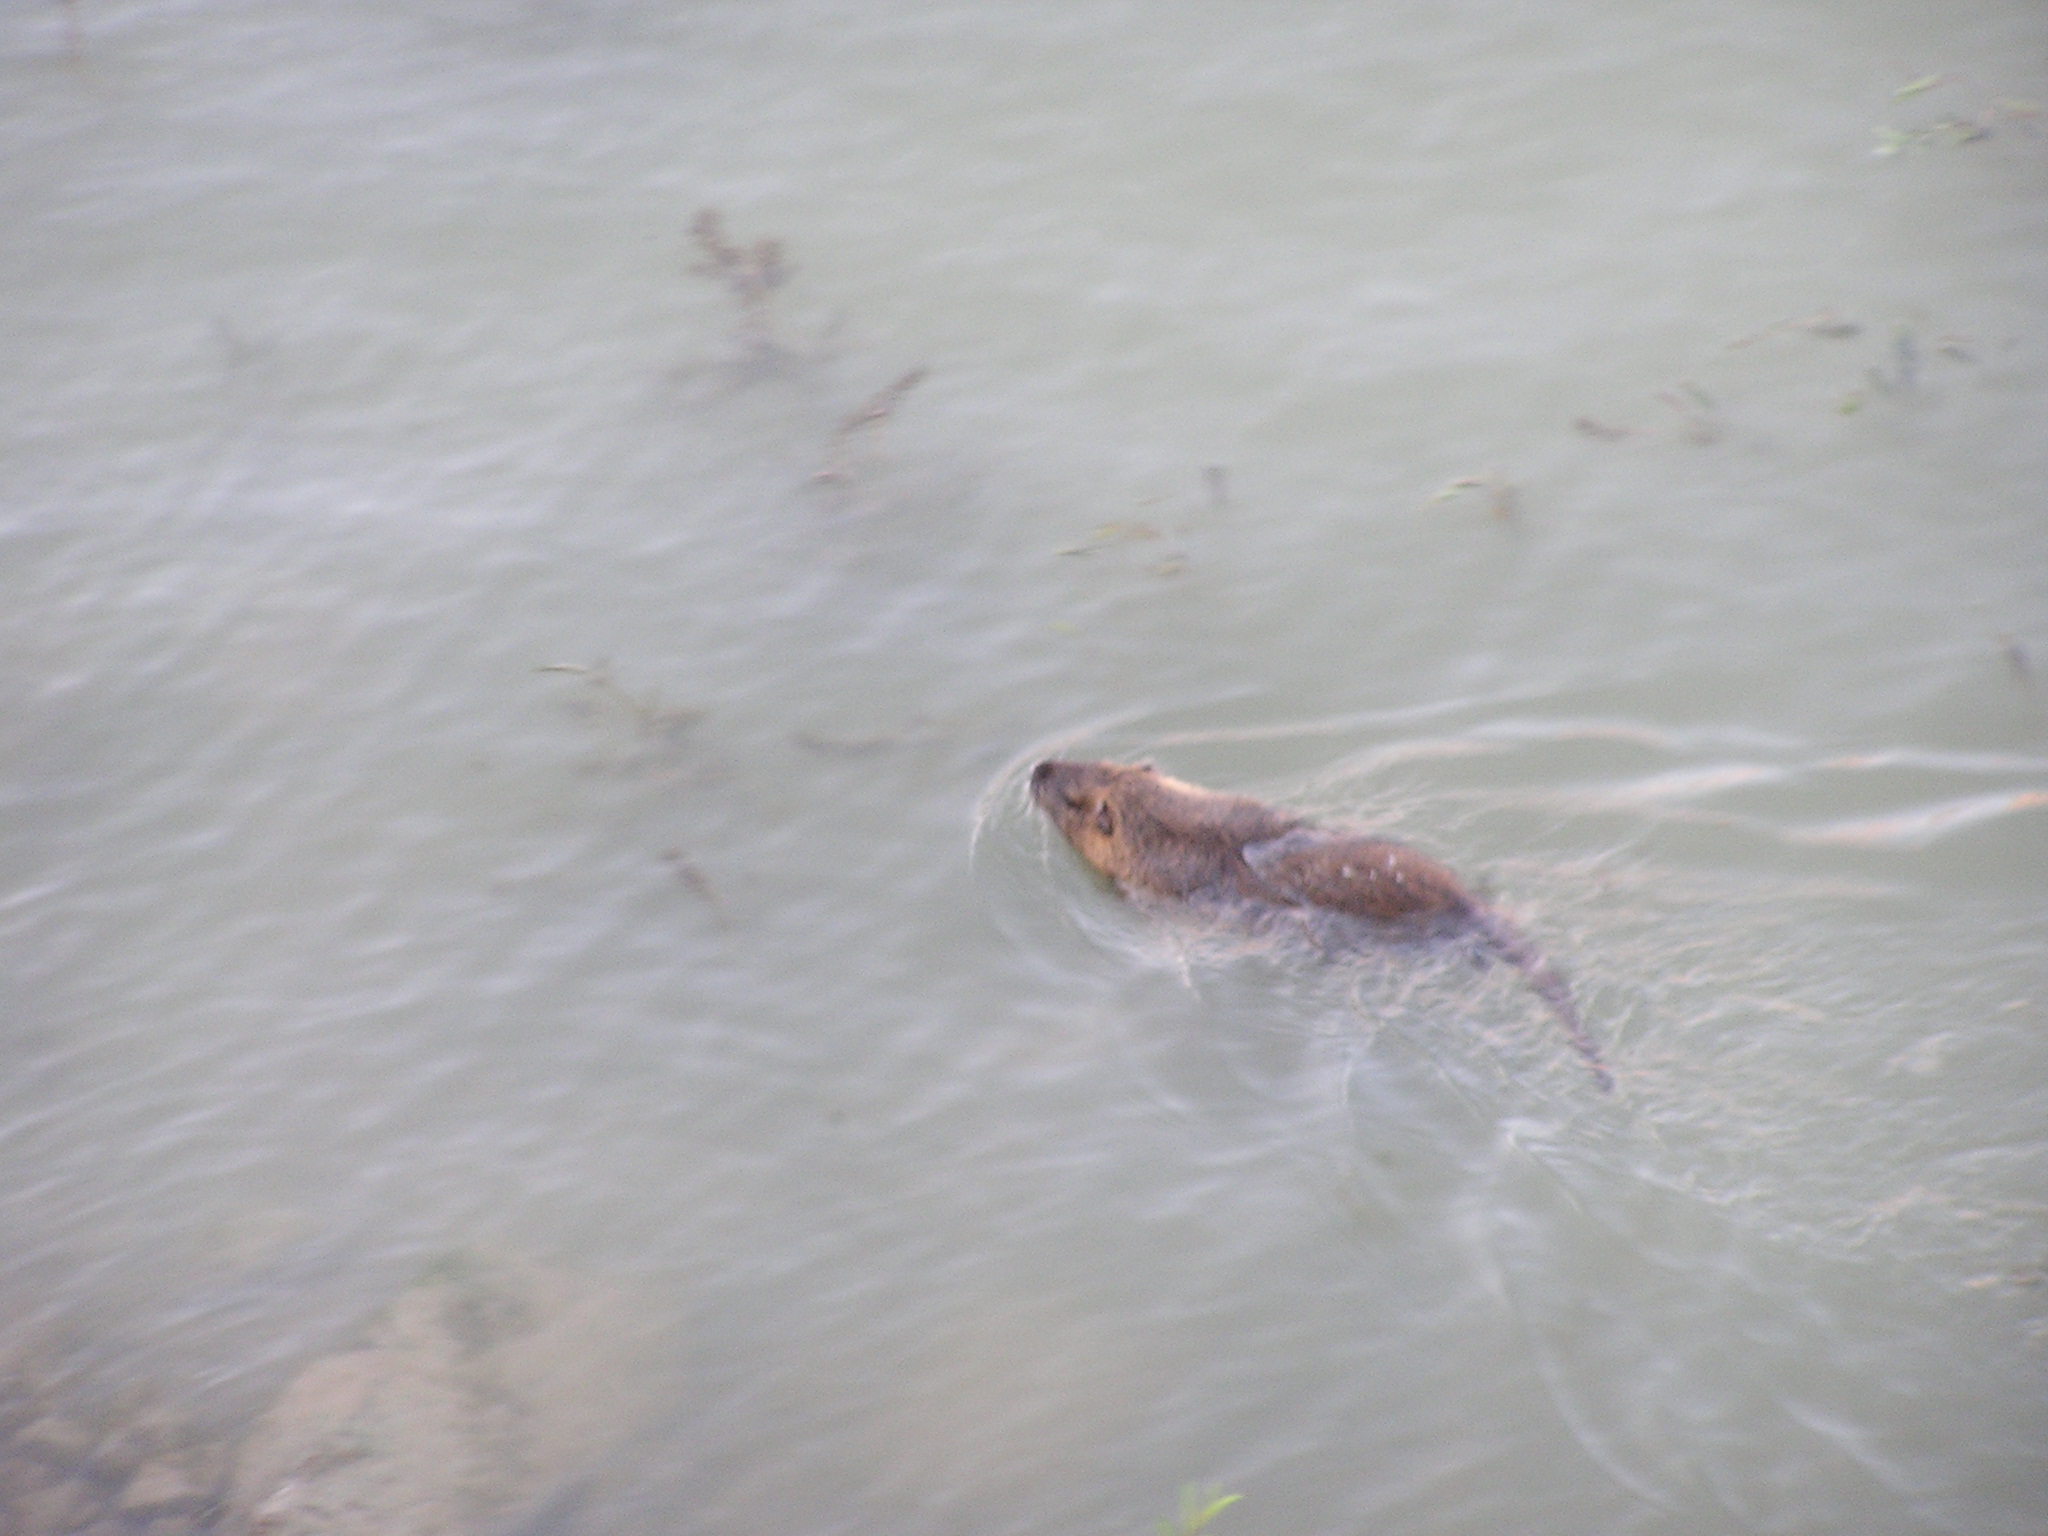 river otter or muskrat cruising the Arno